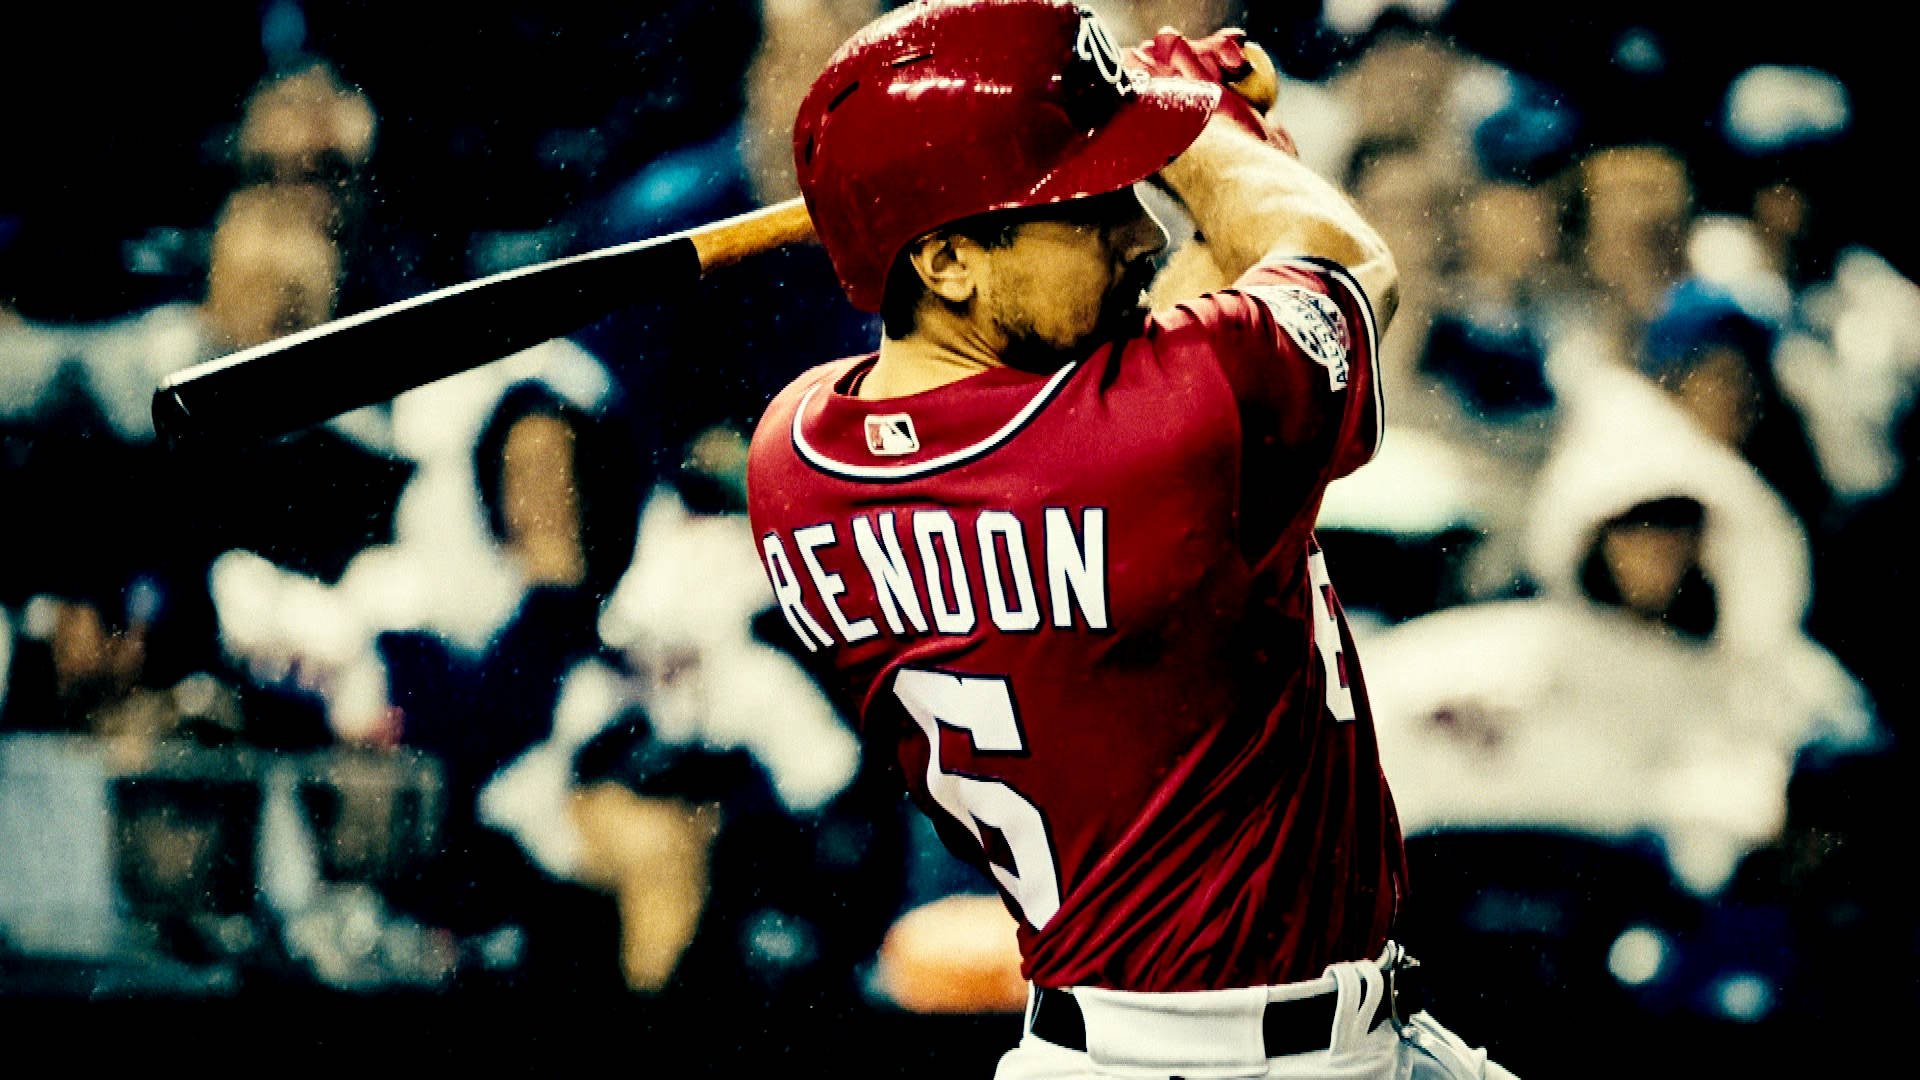 Photo Of Anthony Rendon Swinging With Vintage Filter